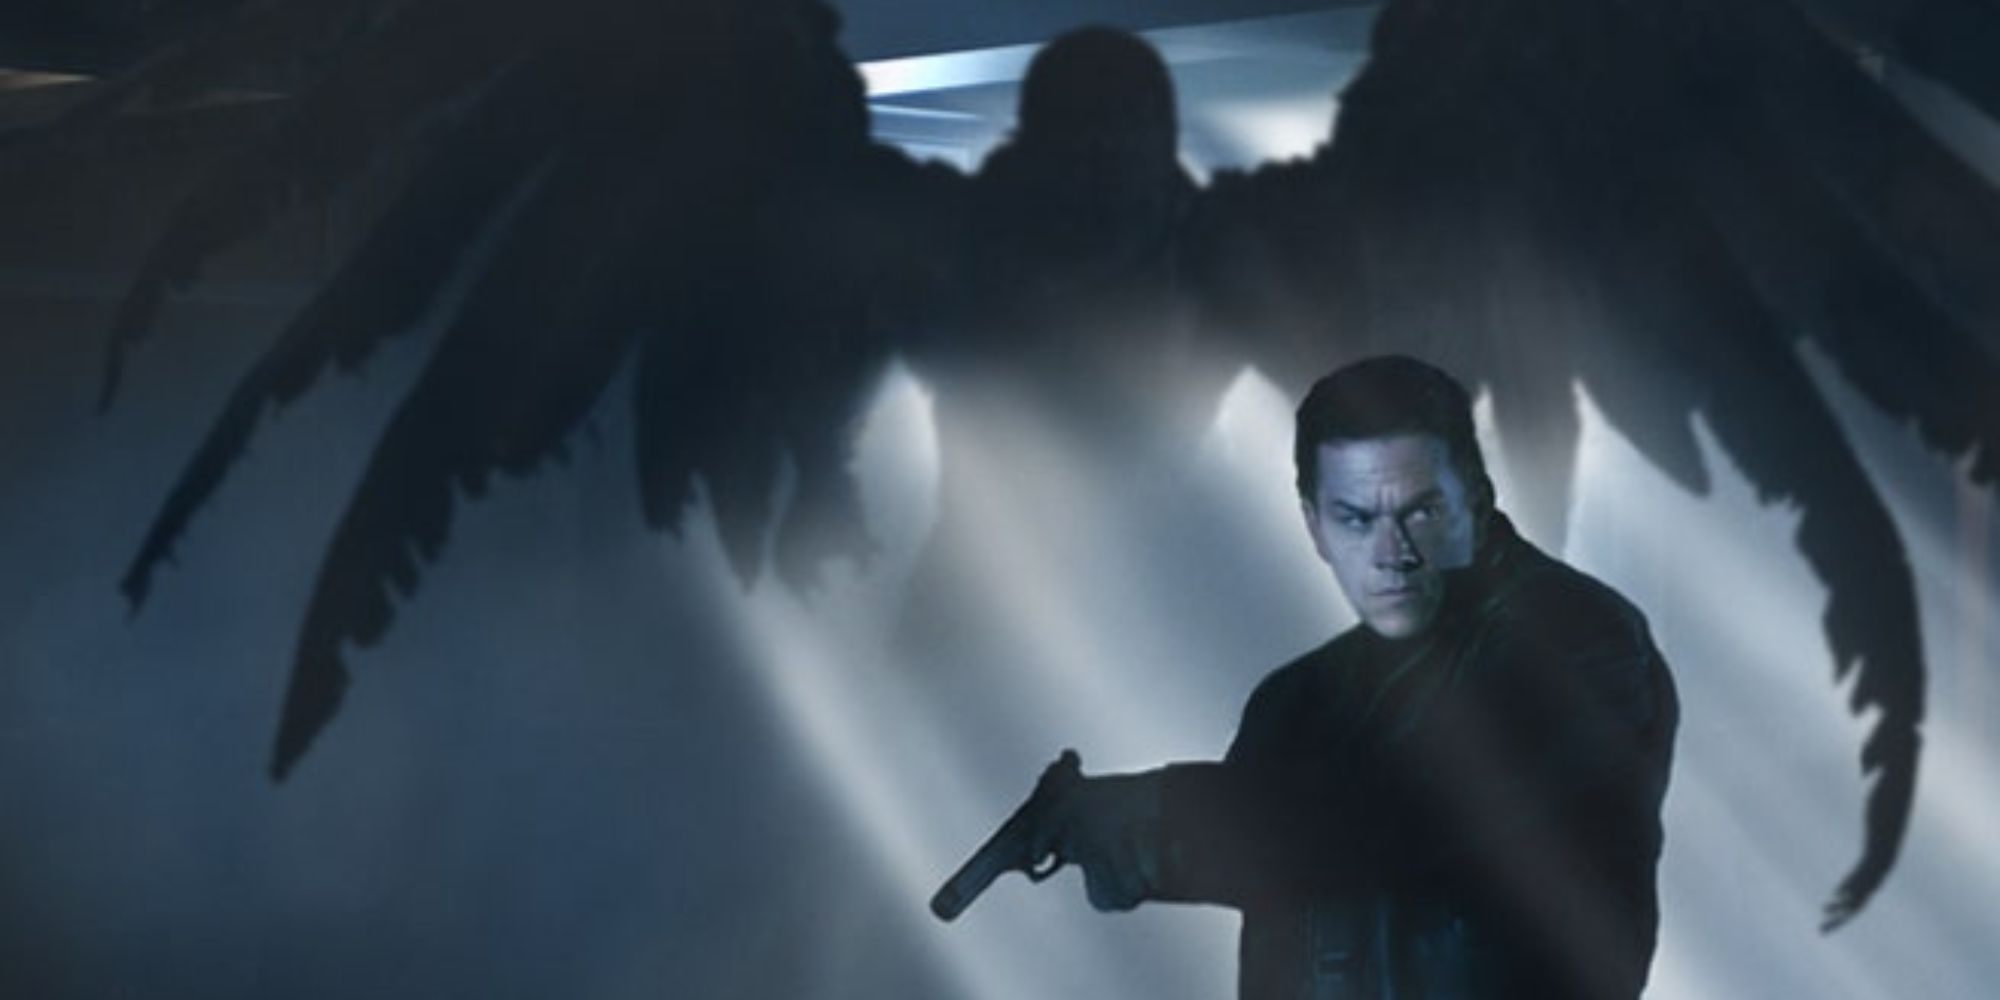 Still from the Max Payne movie of Mark Wahlberg's protagonist standing in front of a winged creature.